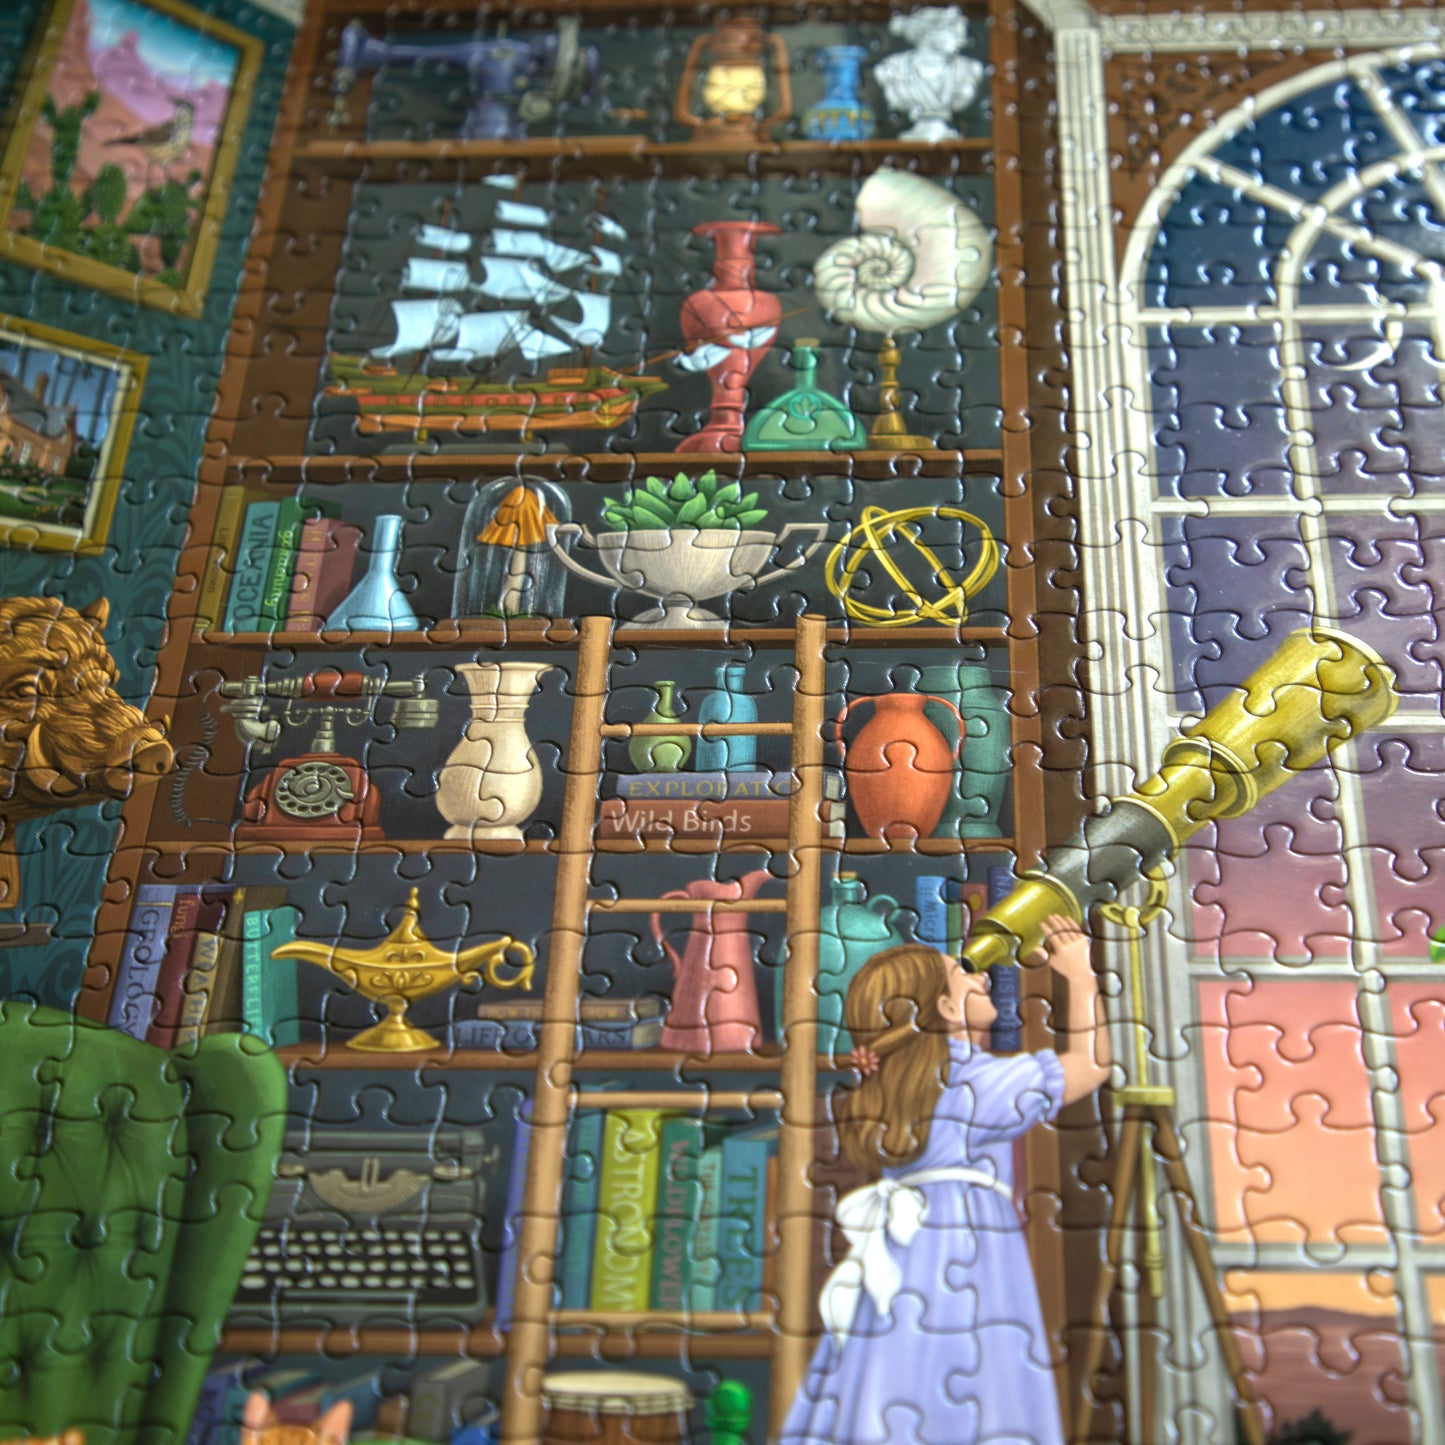 Alchemist's Library 1000 Piece Jigsaw Puzzle | Unique Gifts for Women